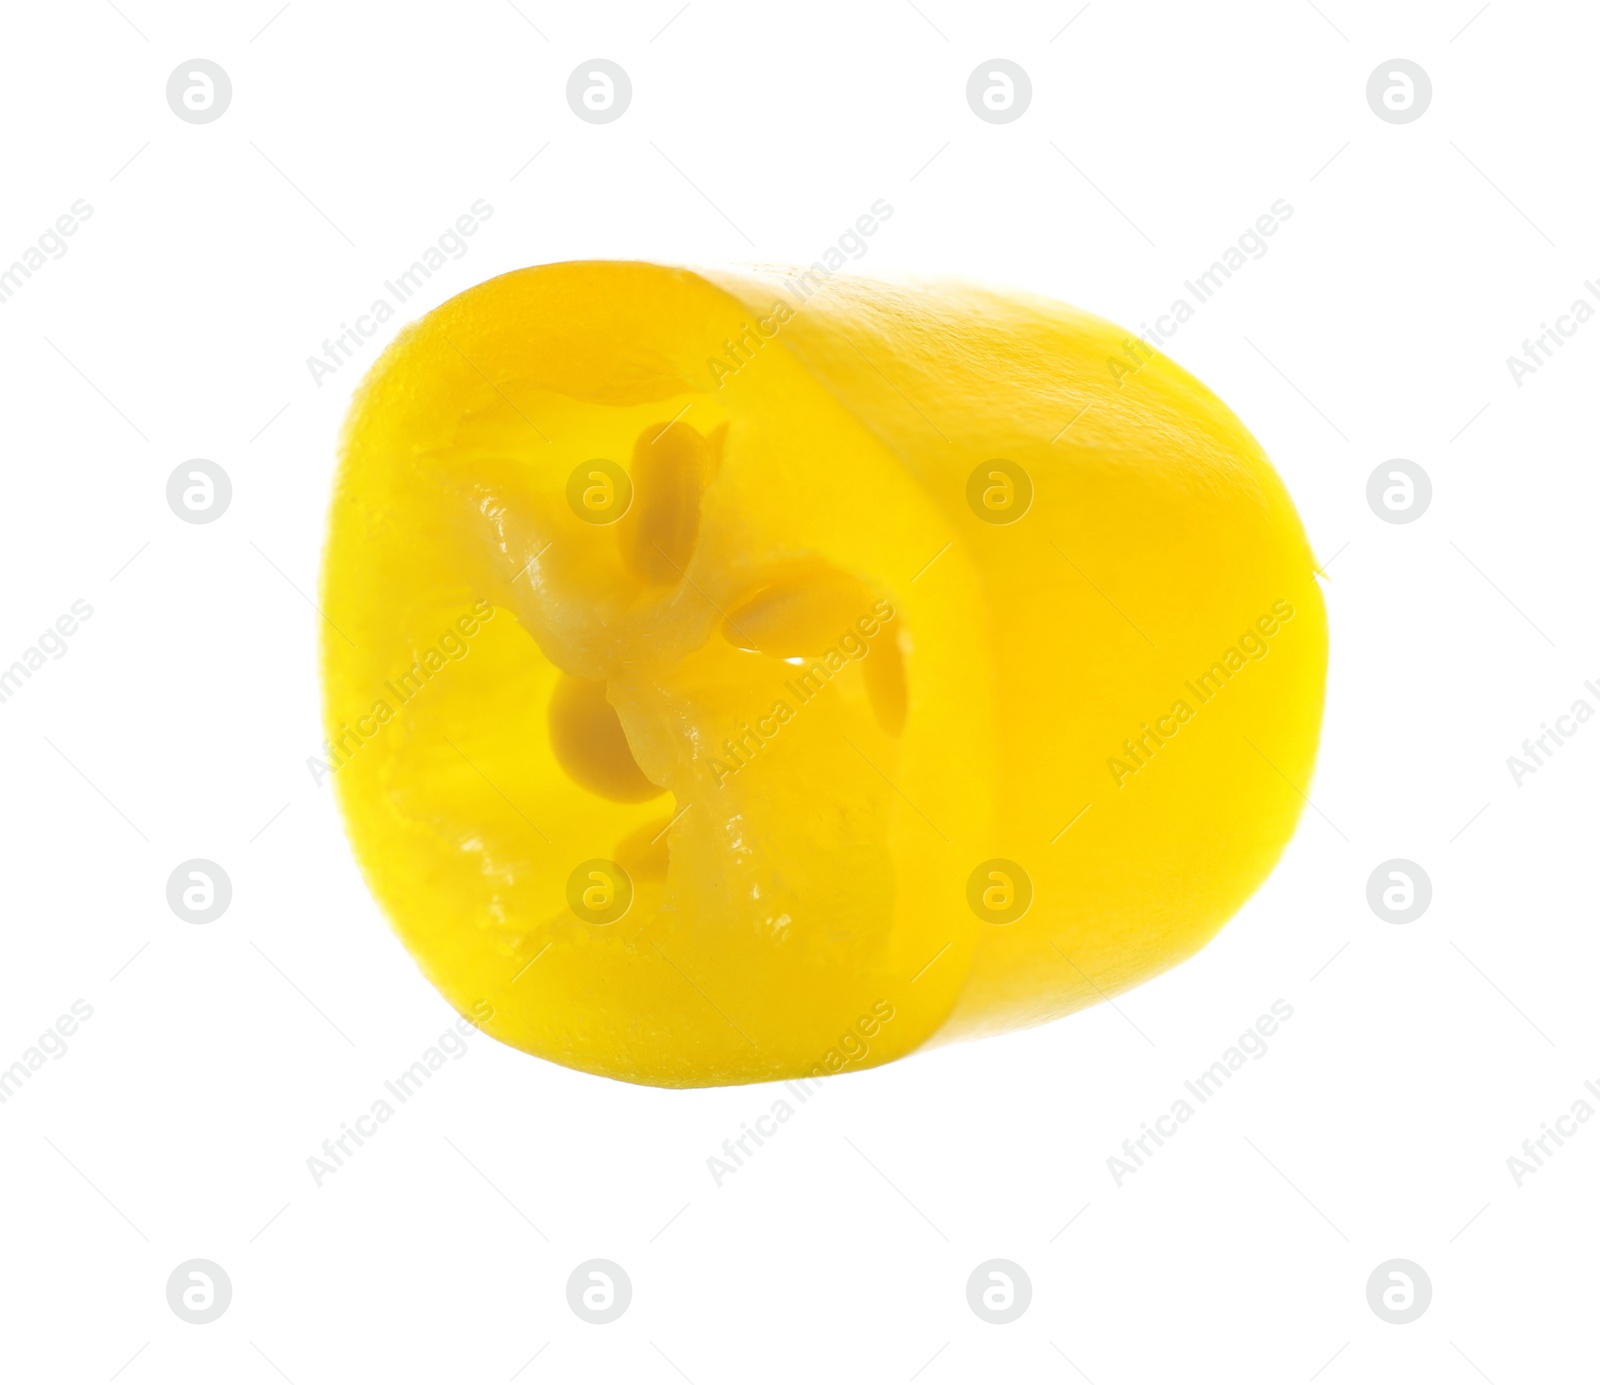 Photo of Piece of yellow hot chili pepper isolated on white